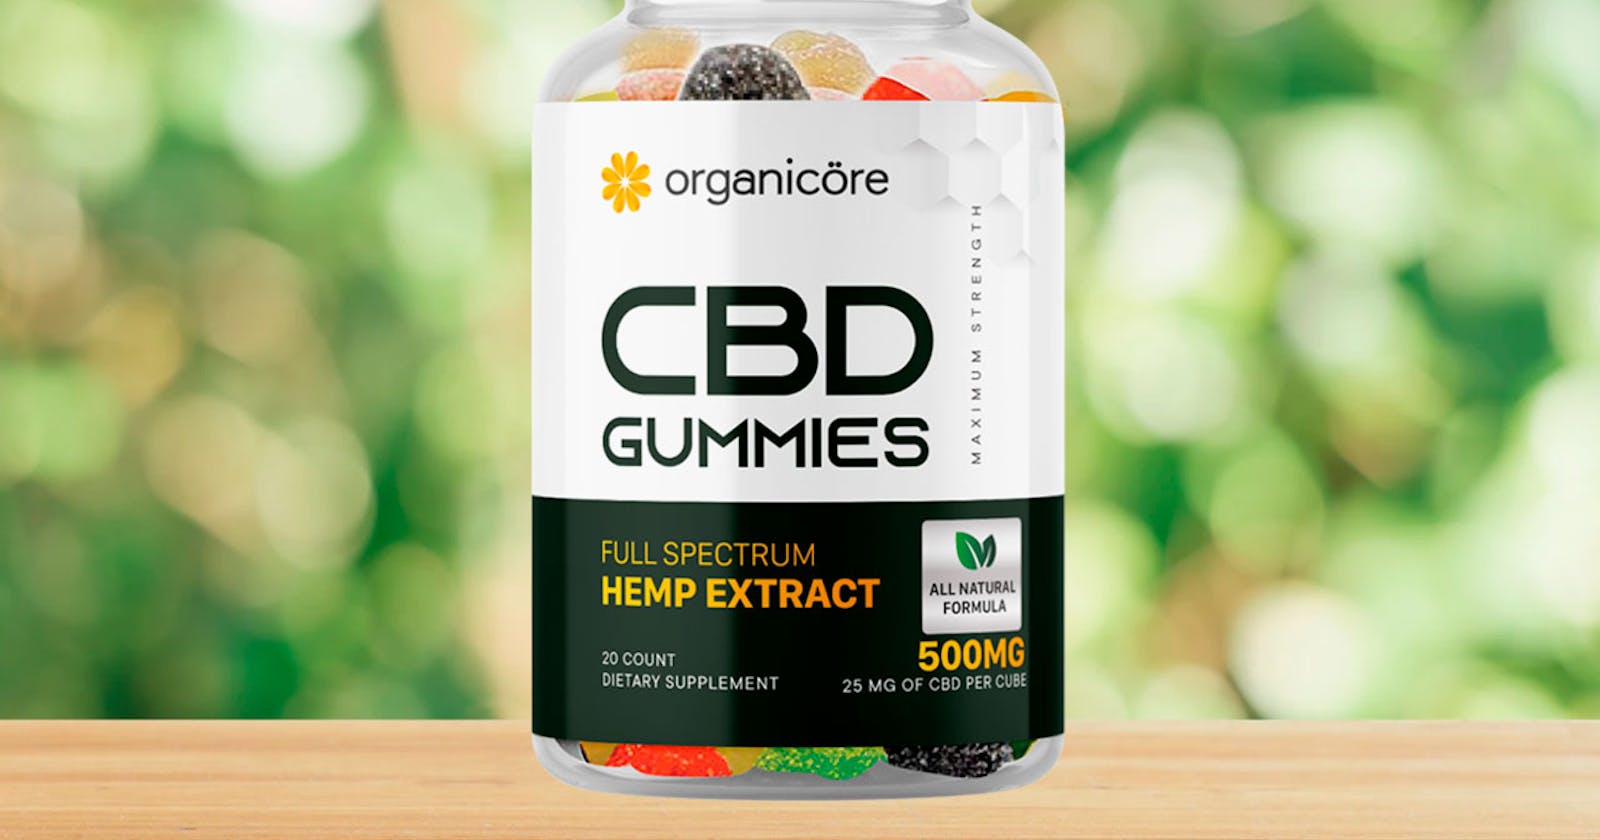 Organicore CBD Gummies Reviews (Quit Smoking) Relief Anxiety, Stress, Reduce Muscle & Joint Pain, Where To Buy?